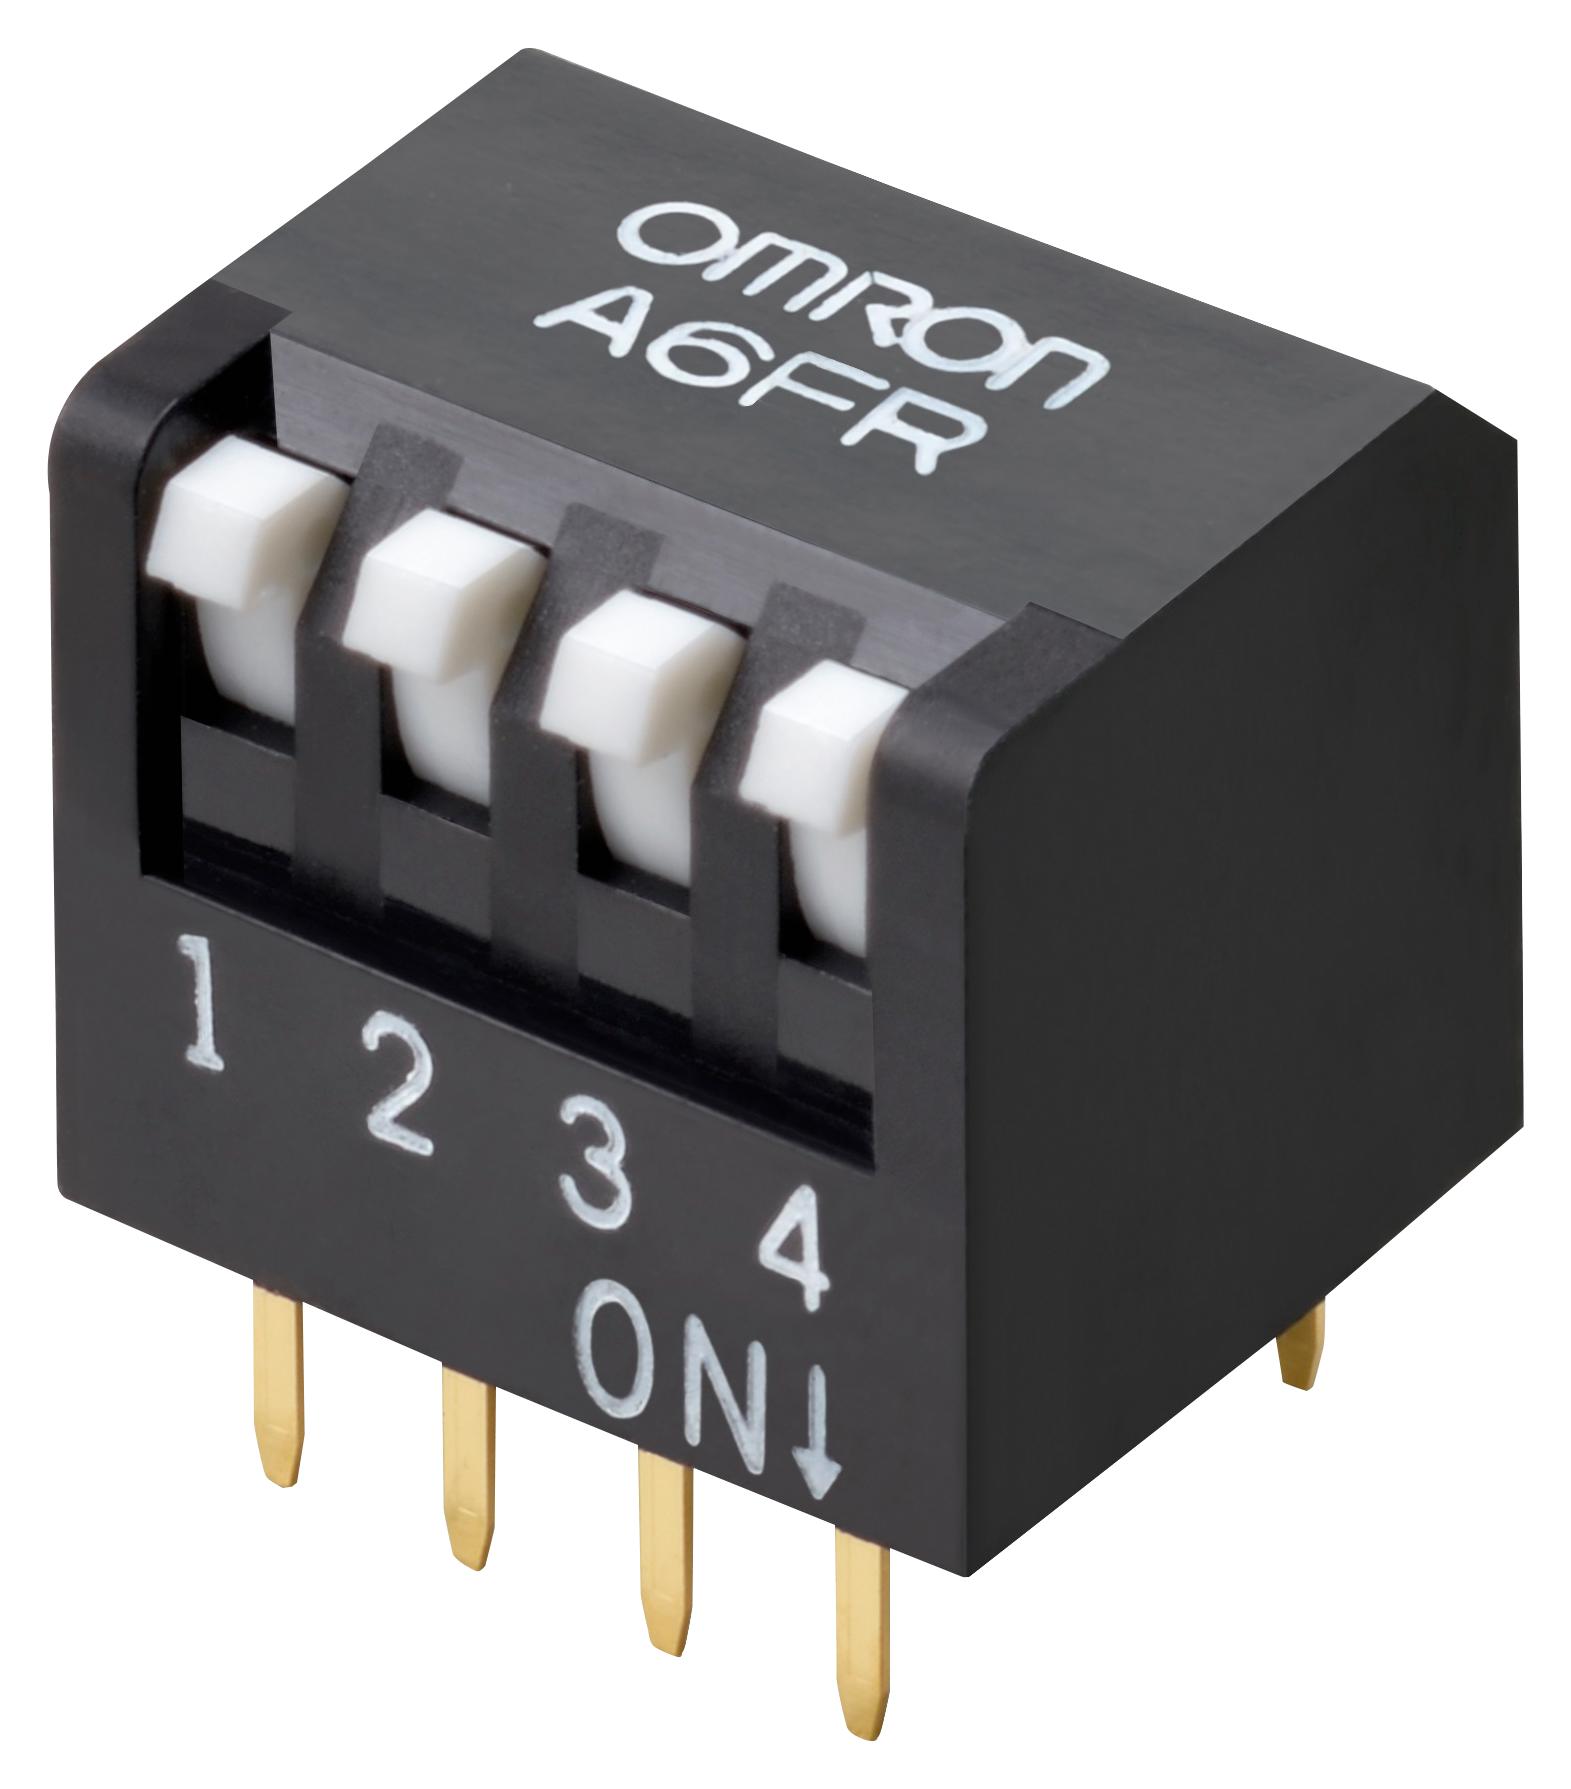 A6FR-9101 DIP SWITCH, 9POS, SPST, PIANO KEY, TH OMRON